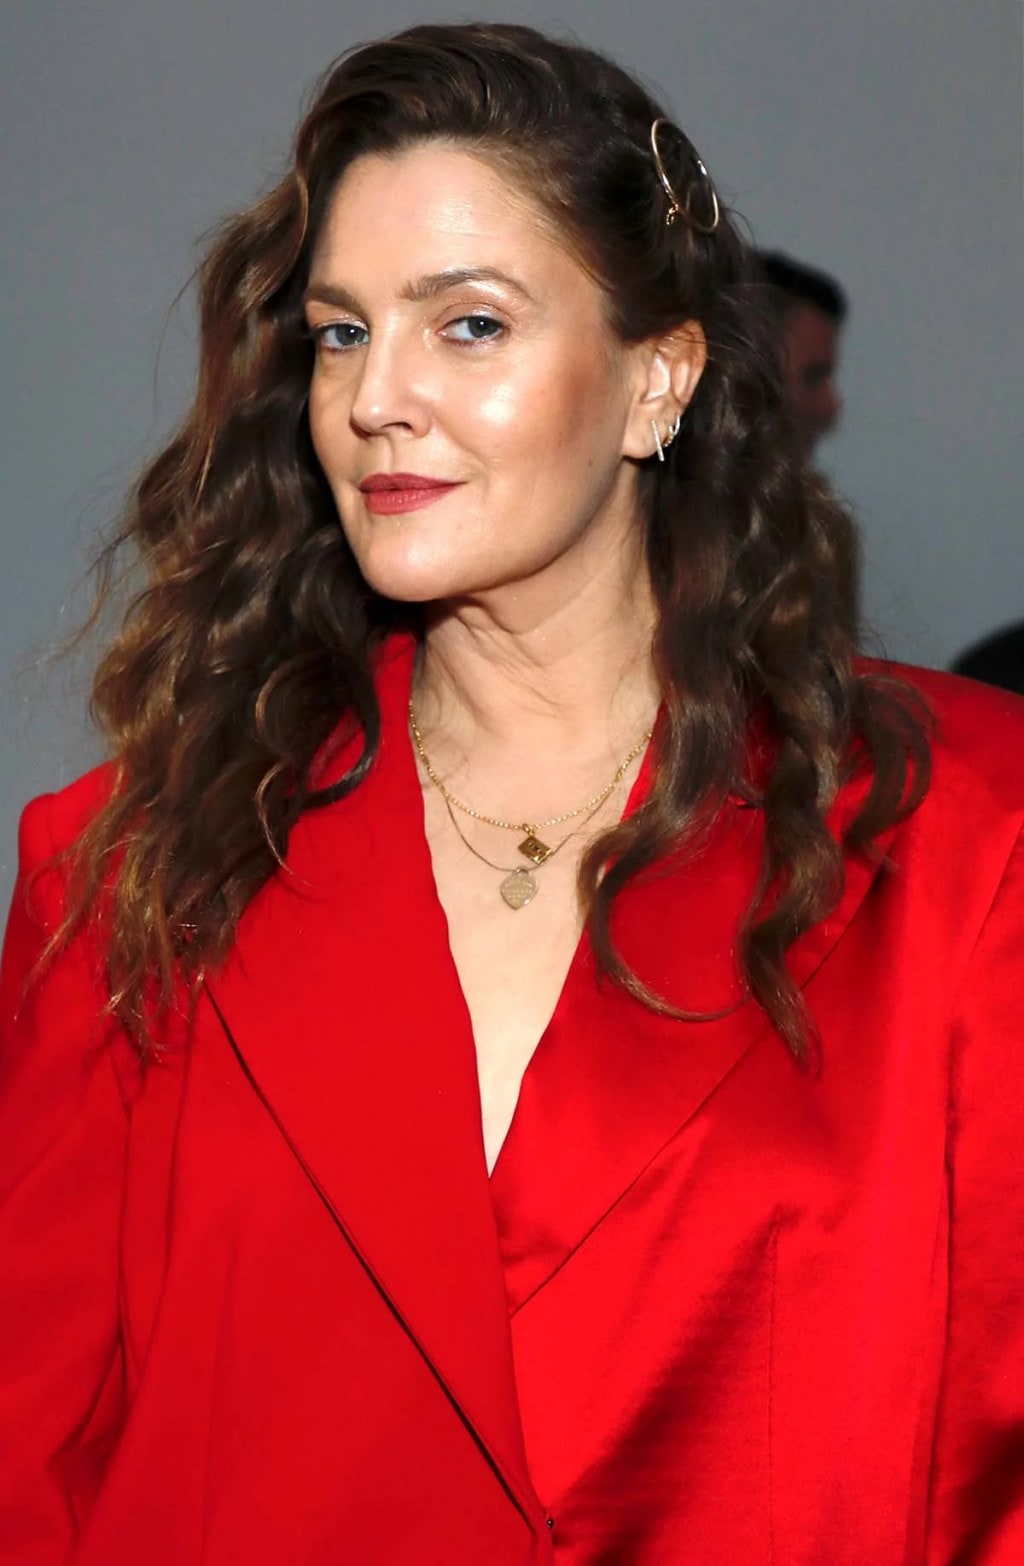 Drew Barrymore Leading Lady for Pro-aging Trend